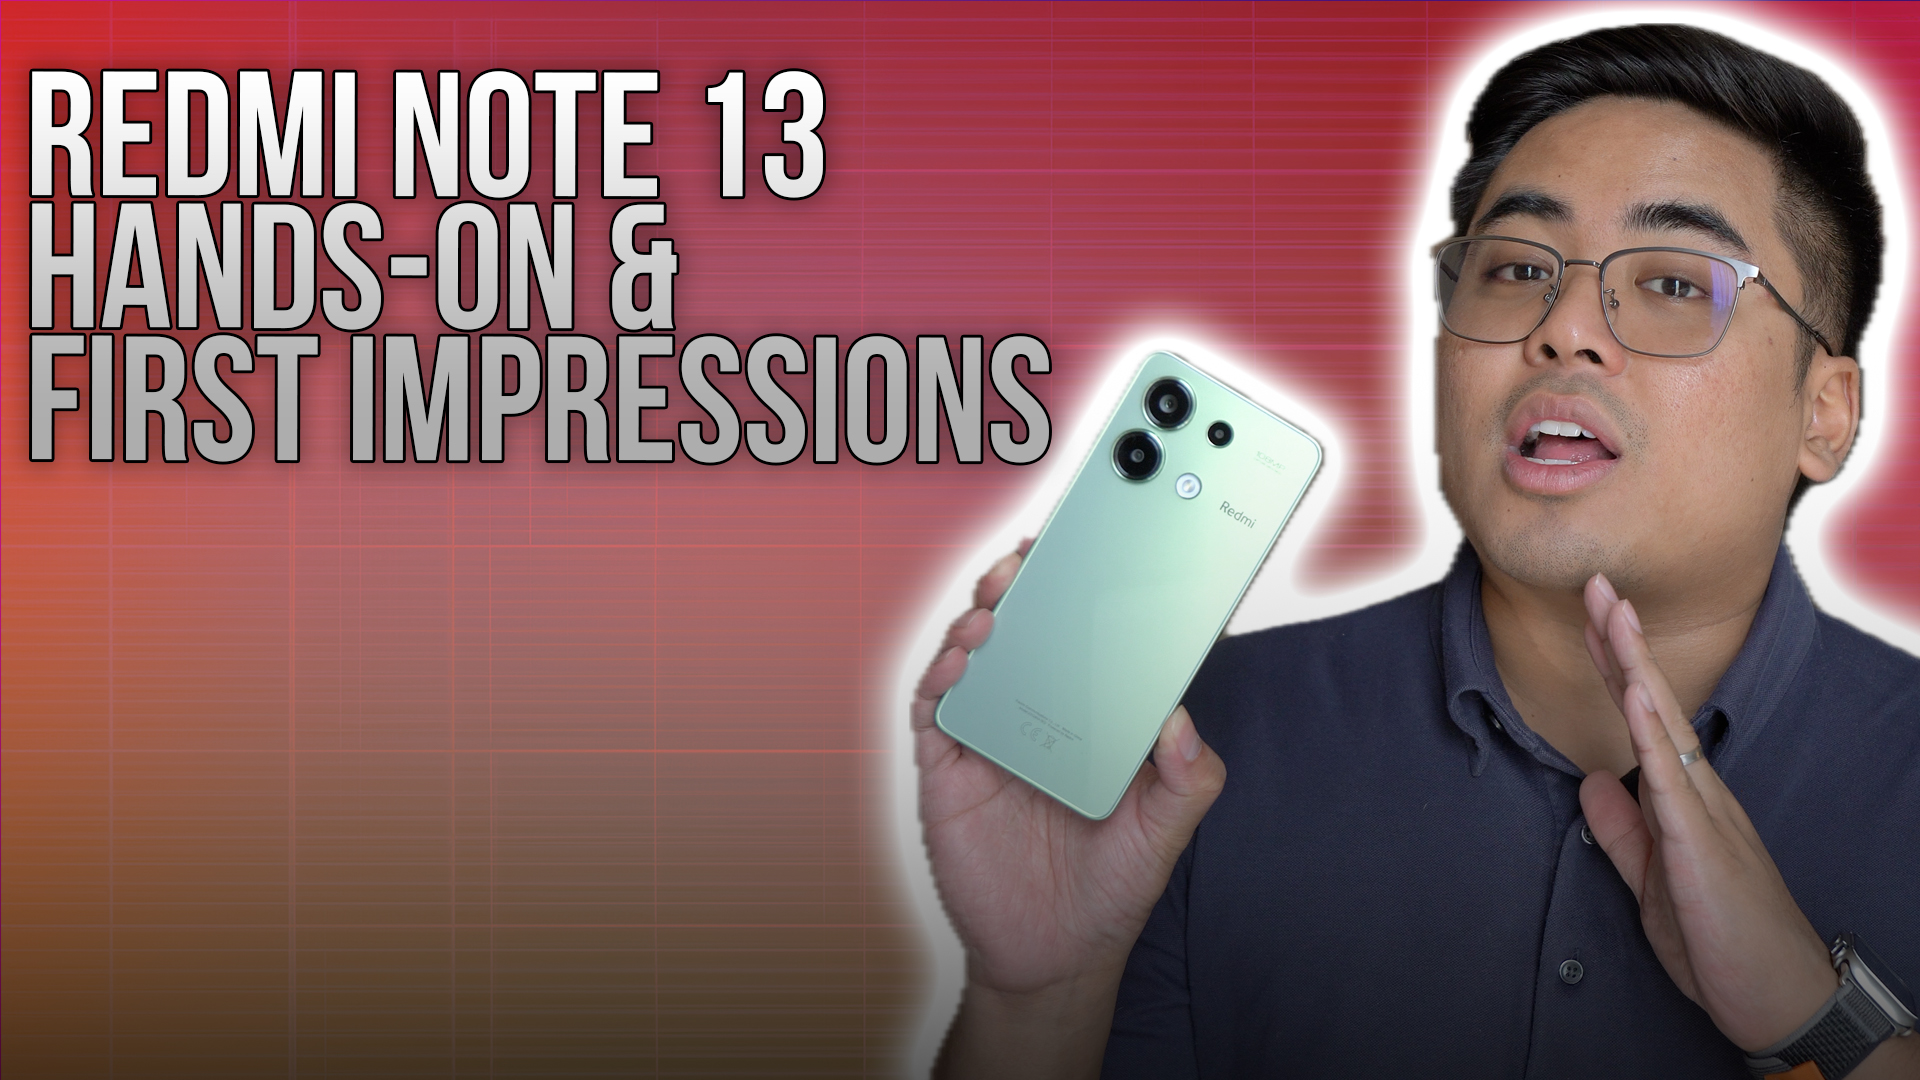 Redmi Note 12 Pro (8GB+256GB) – First Impression and Unboxing